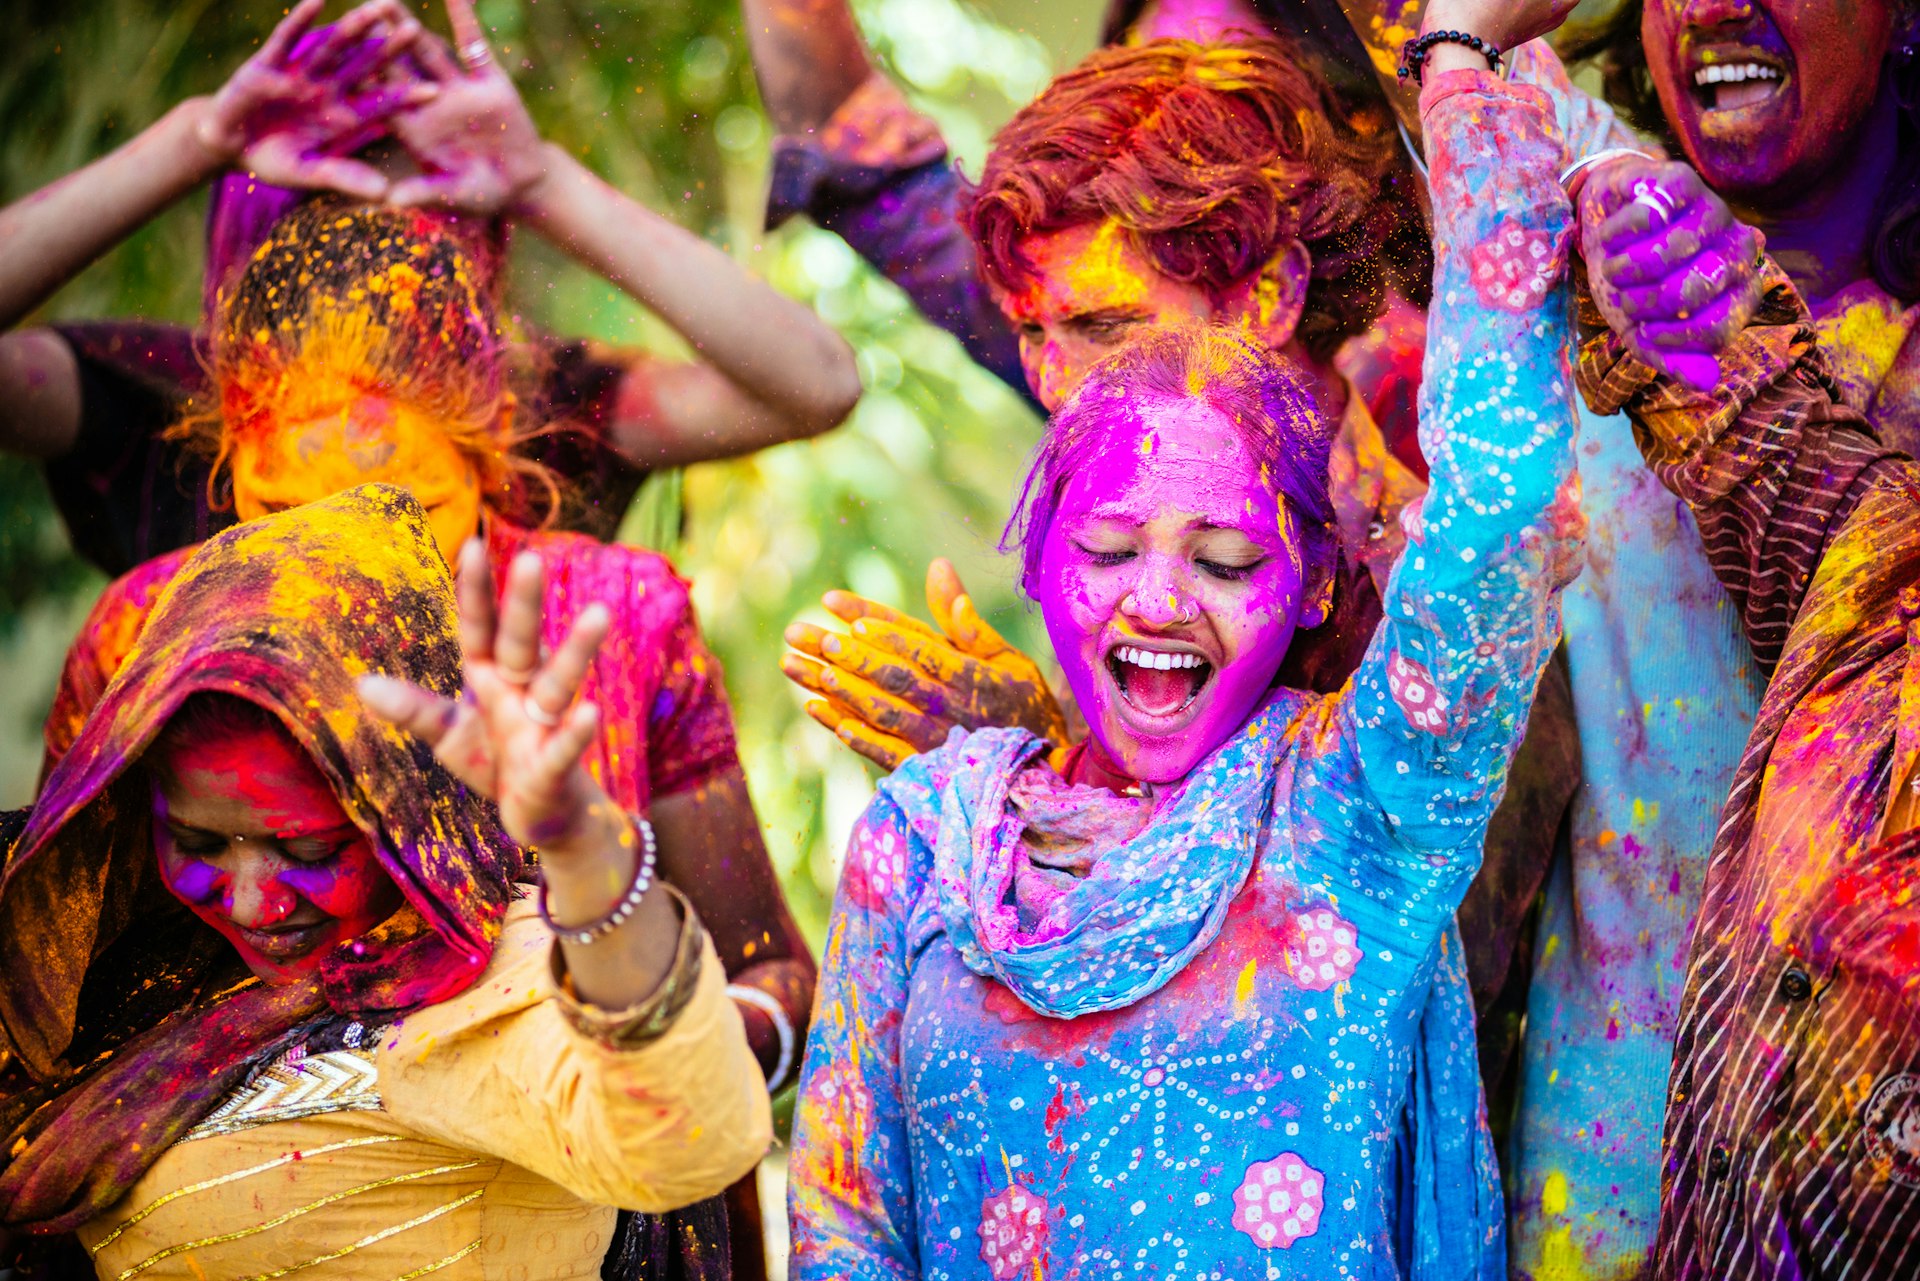  Women in India dancing during Holi covered in colorful powder